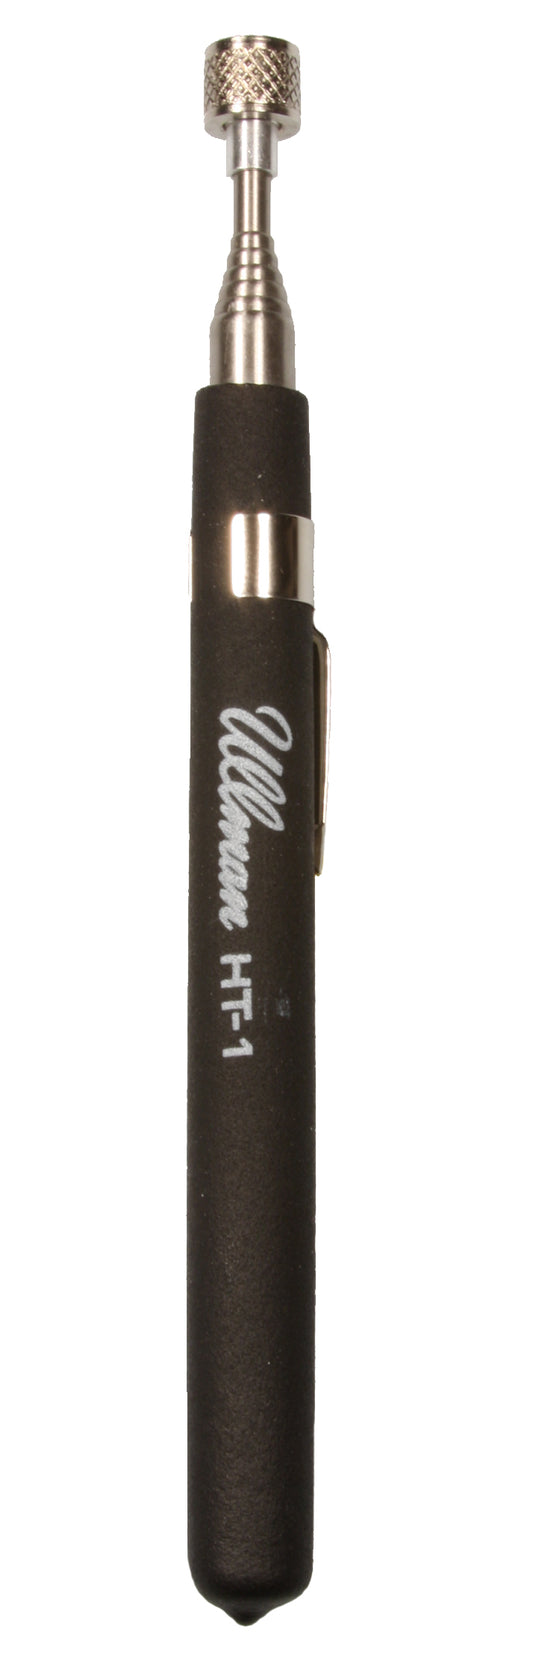 ULLMAN HT-1 Telescopic Magnetic Pick-Up Tool with POWERCAP®, HT1